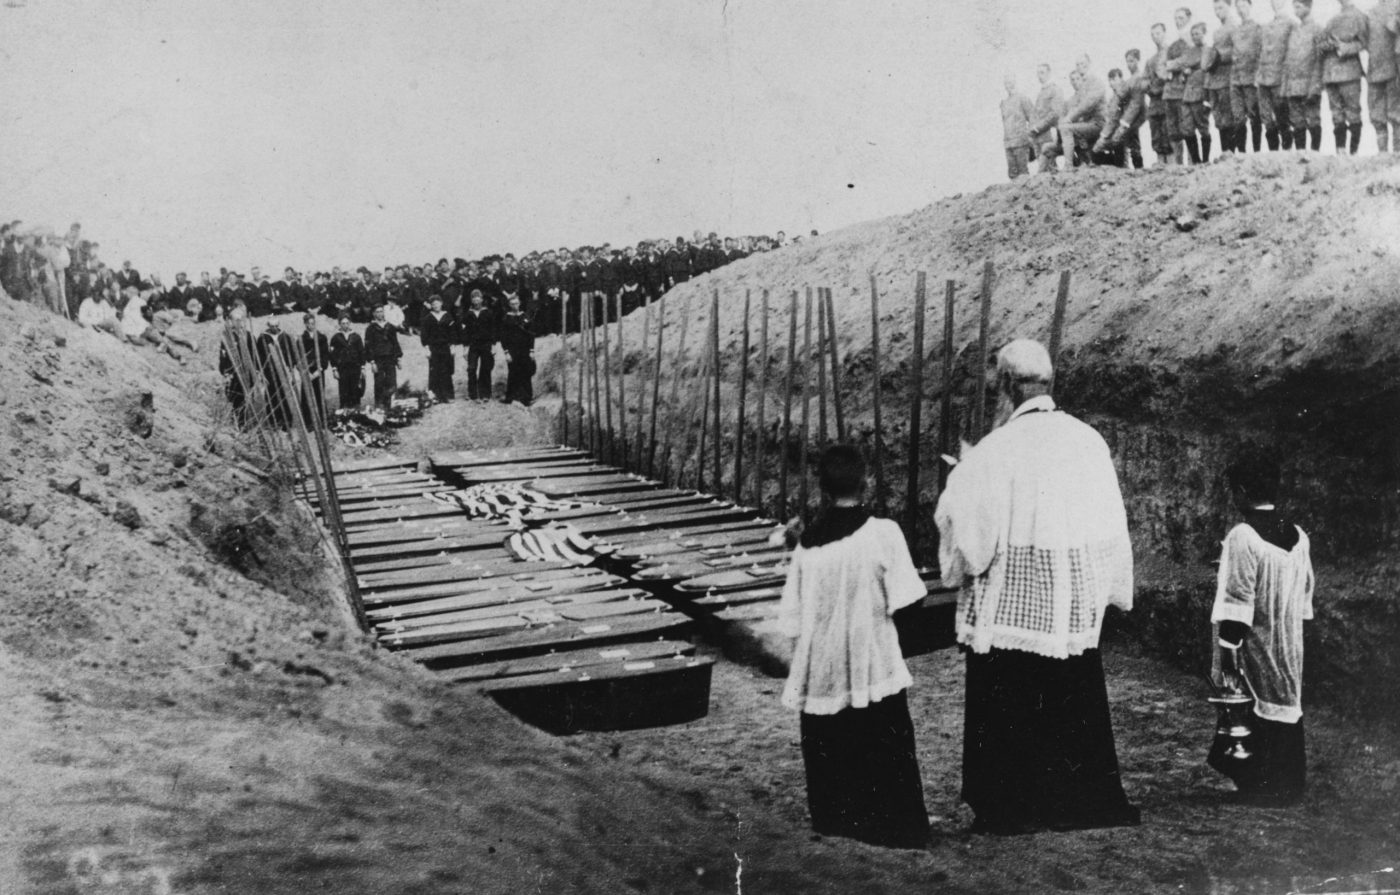 Catholic rites given over remains prior to burial at the Fort Rosecrans post cemetery. (NHHC)